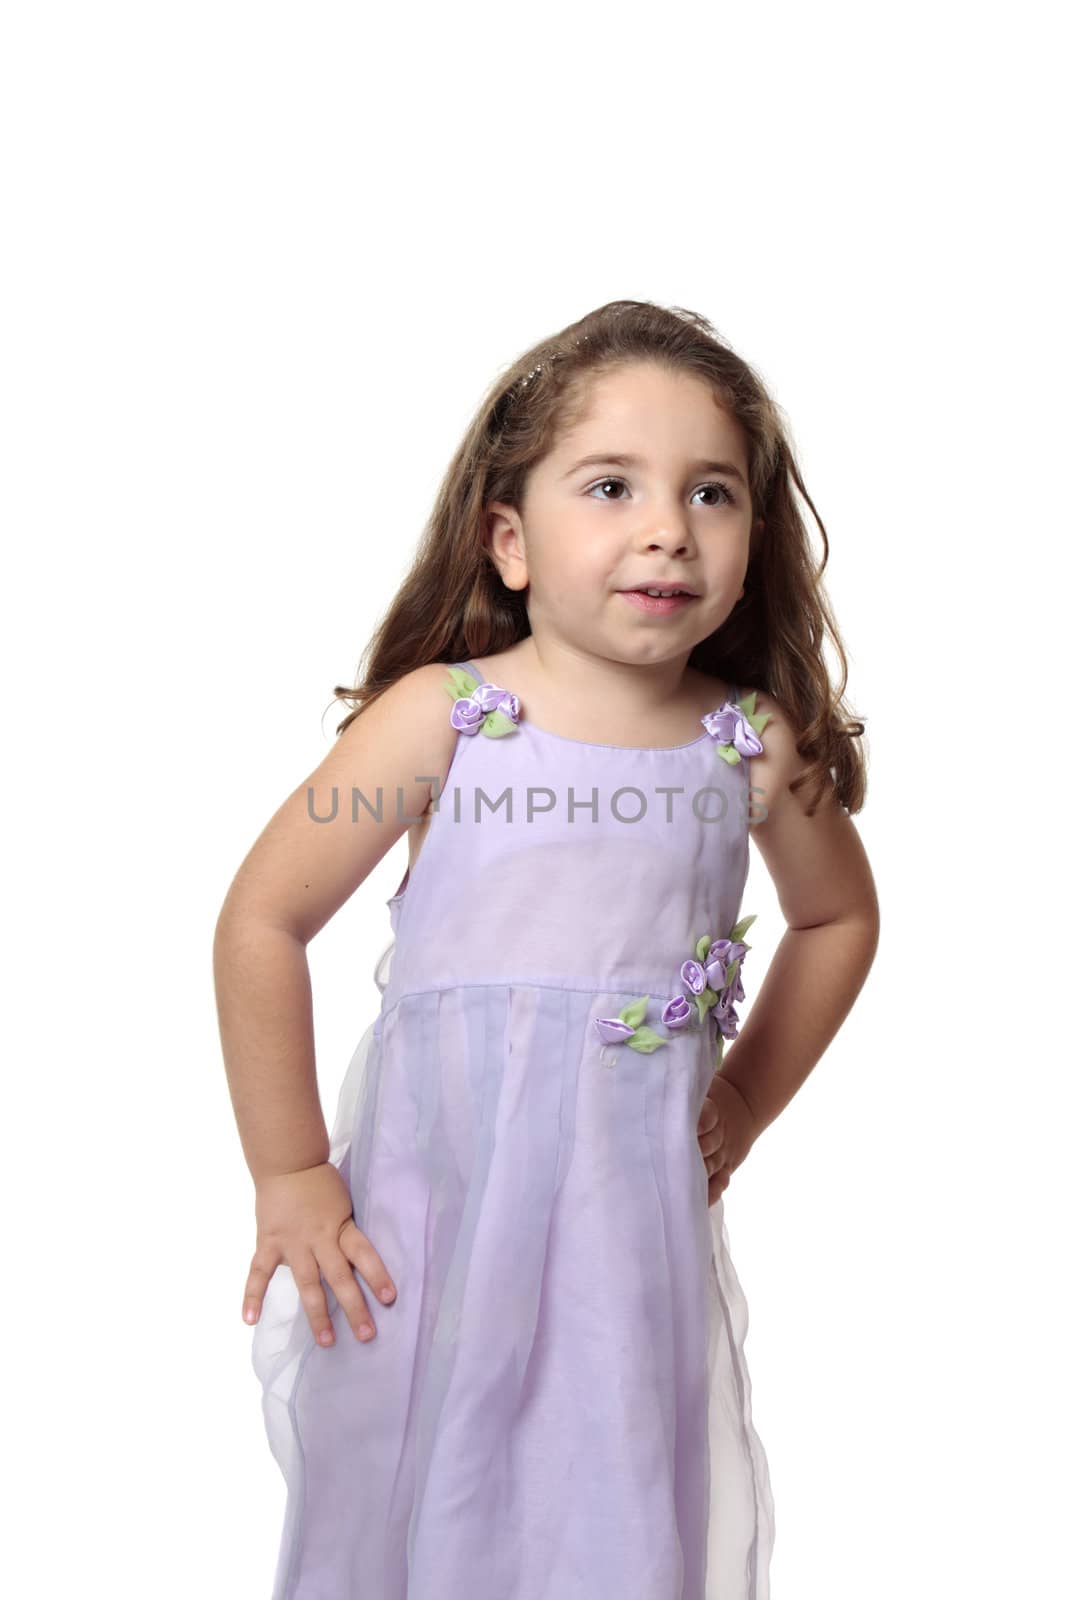 Beautiful young girl dressed in a lilac mauve dress with decorative flower accents.